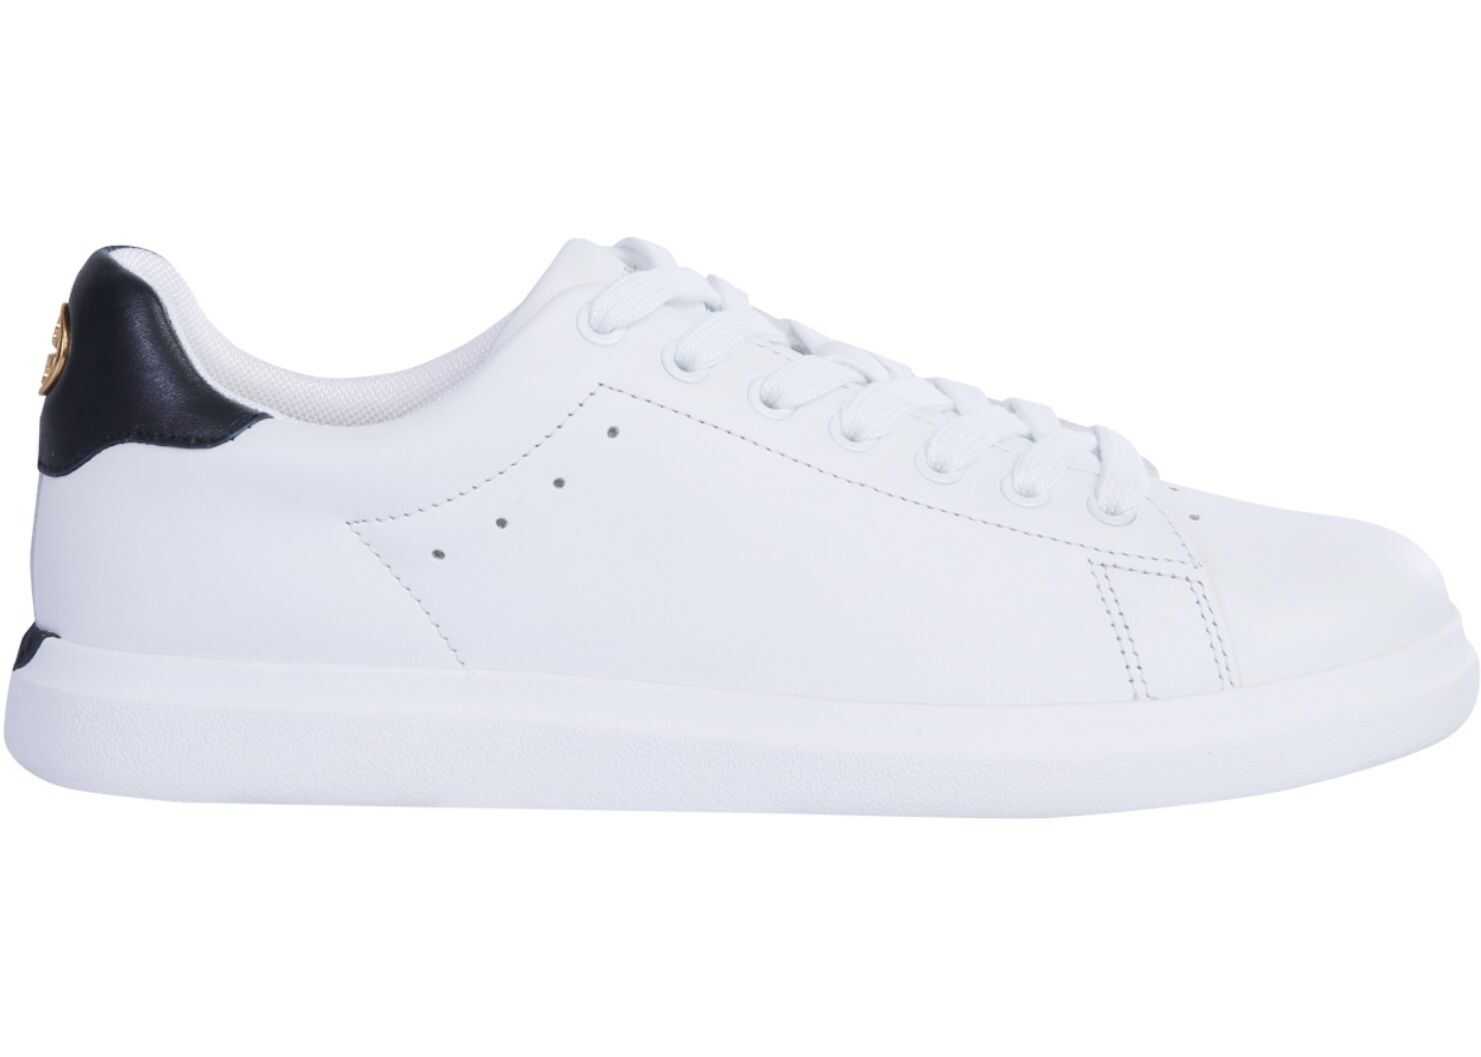 Tory Burch "Howell Court" Sneakers WHITE